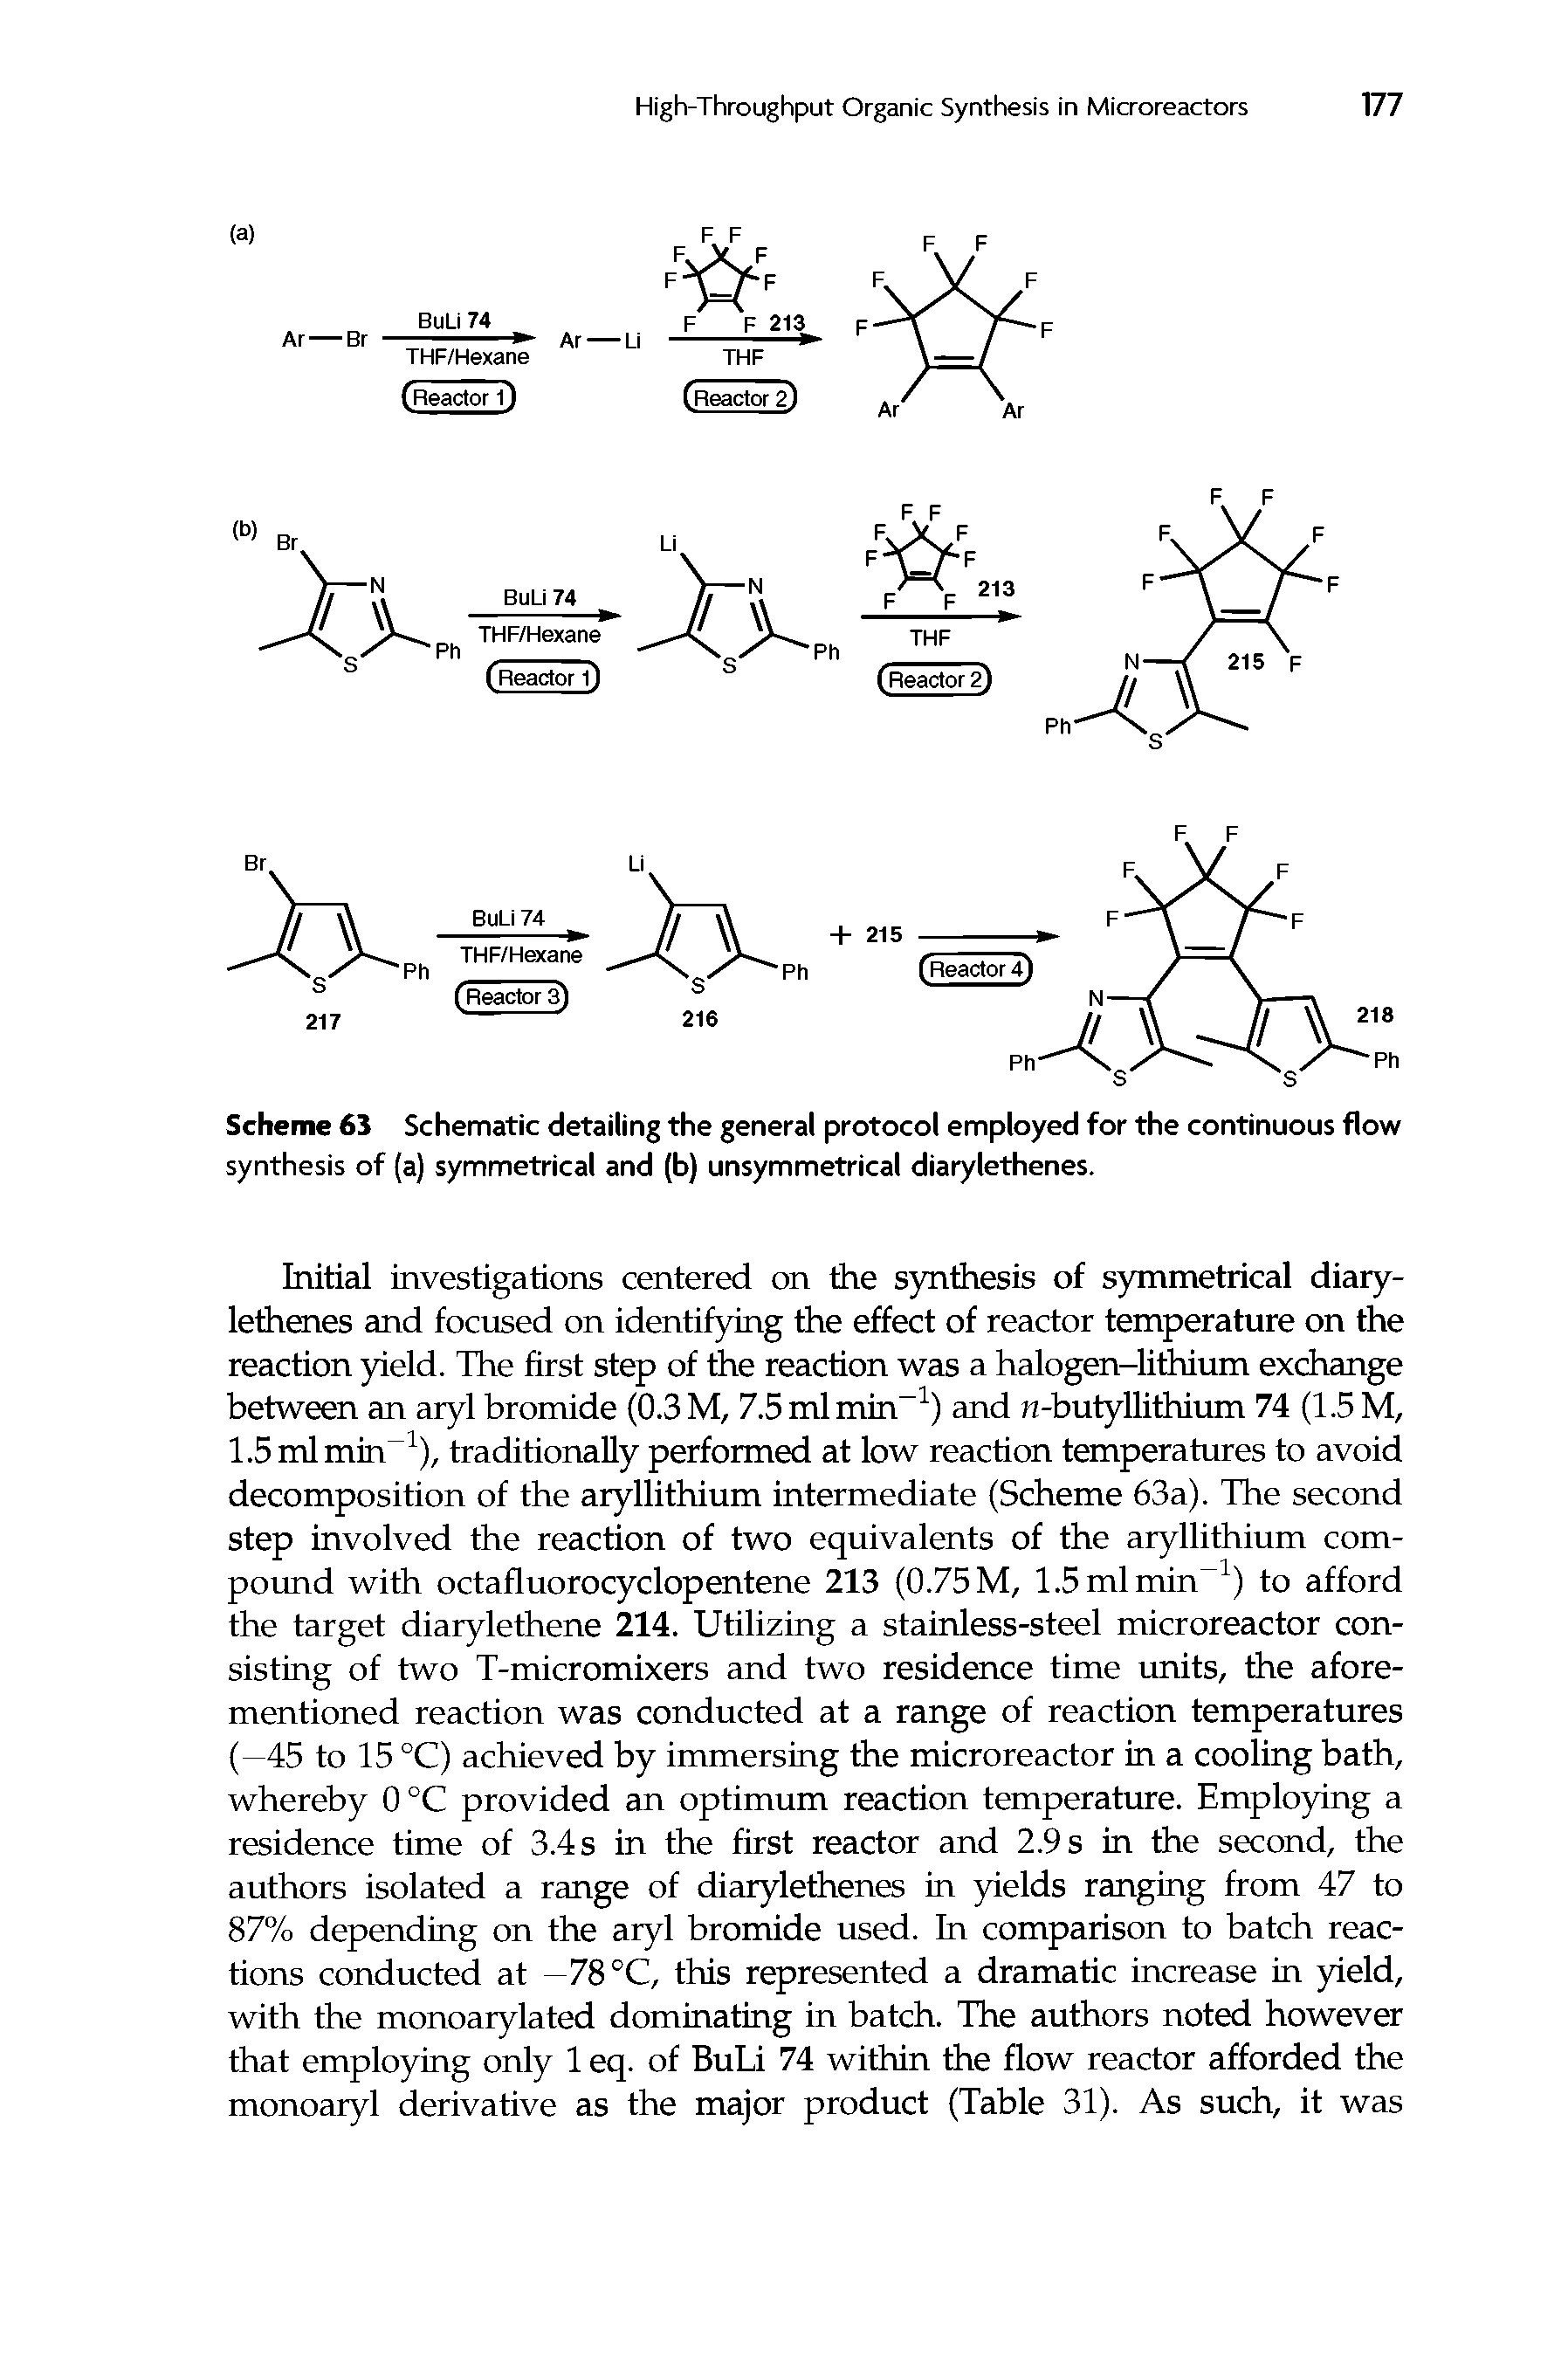 Scheme 63 Schematic detailing the general protocol employed for the continuous flow synthesis of (a) symmetrical and (b) unsymmetrical diarylethenes.